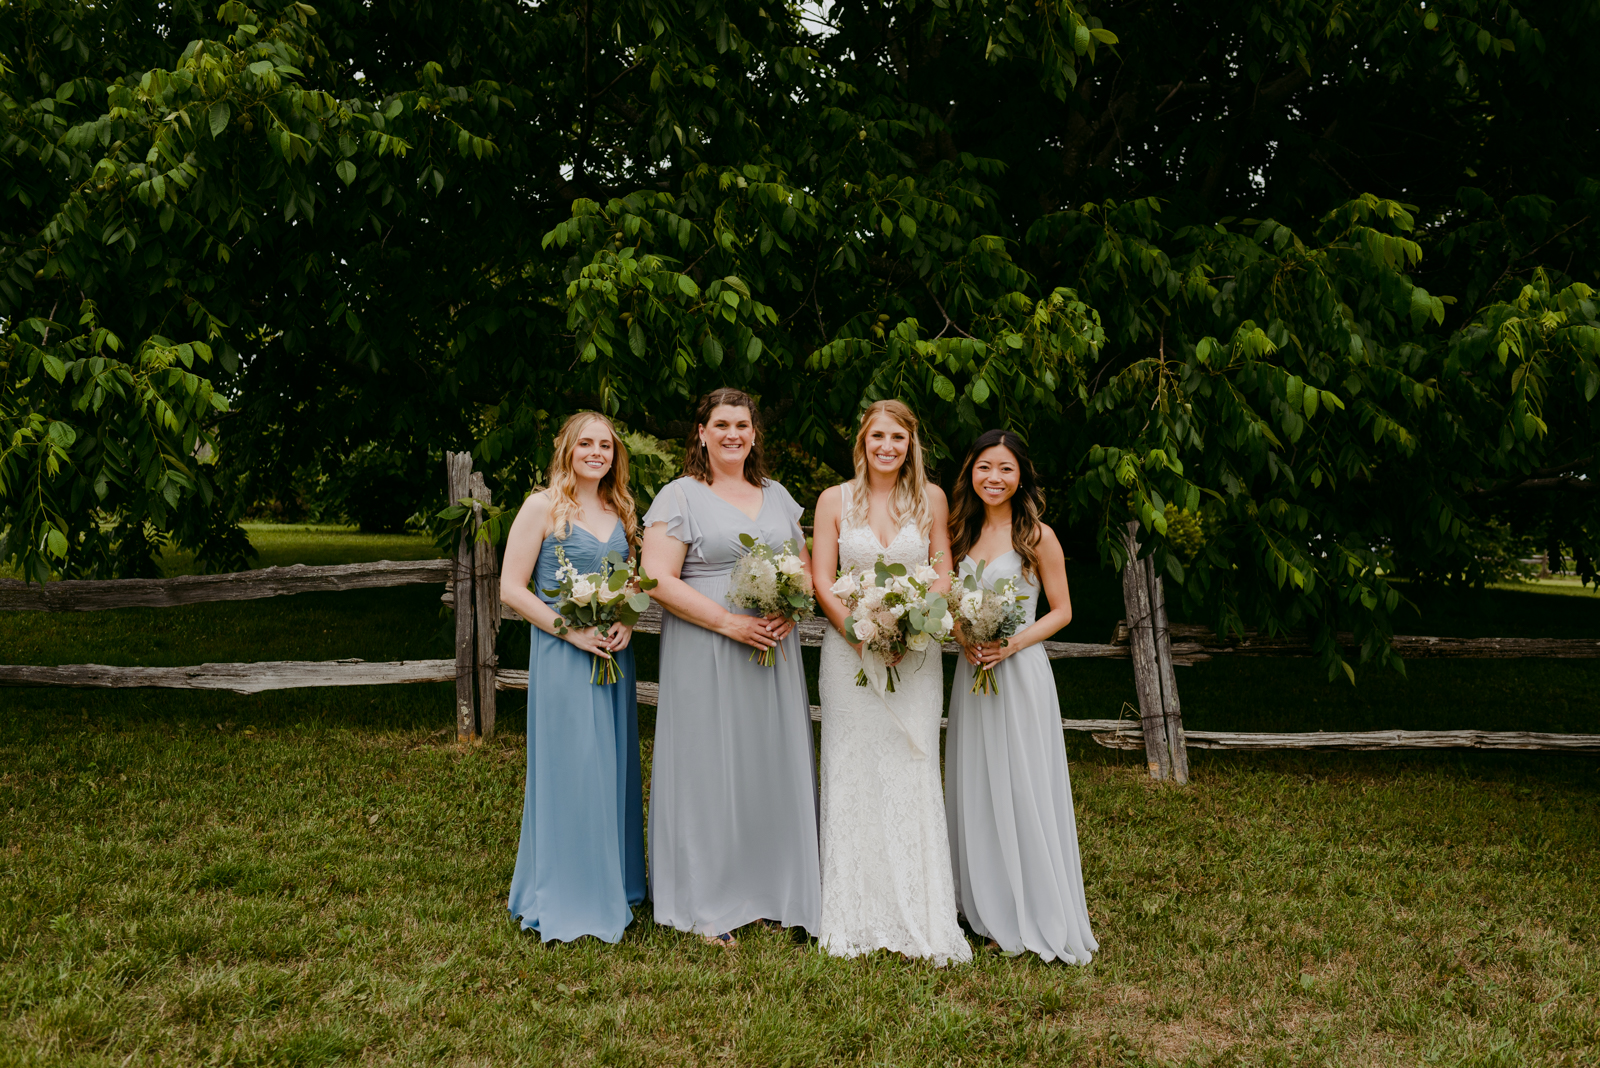 bride and bridesmaids in blue and grey by wooden fence